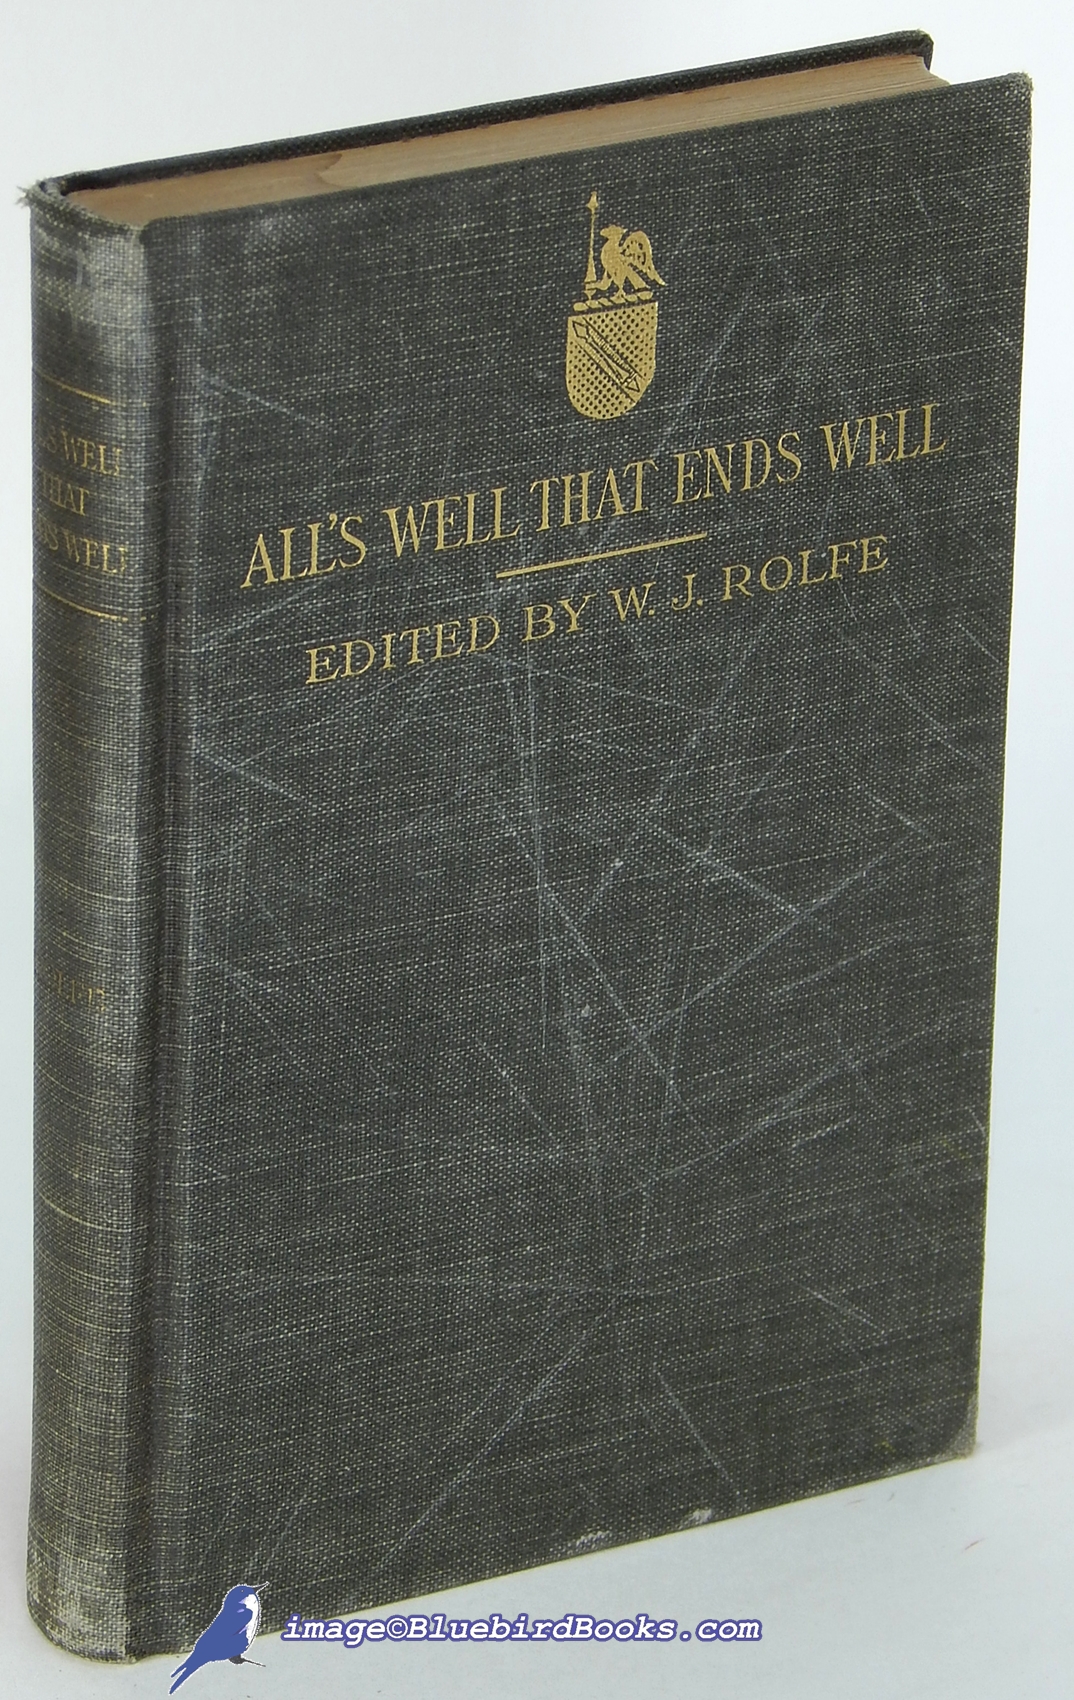 SHAKESPEARE, WILLIAM; ROLFE, WILLIAM J. (EDITOR) - Shakespeare's Comedy of All's Well That Ends Well